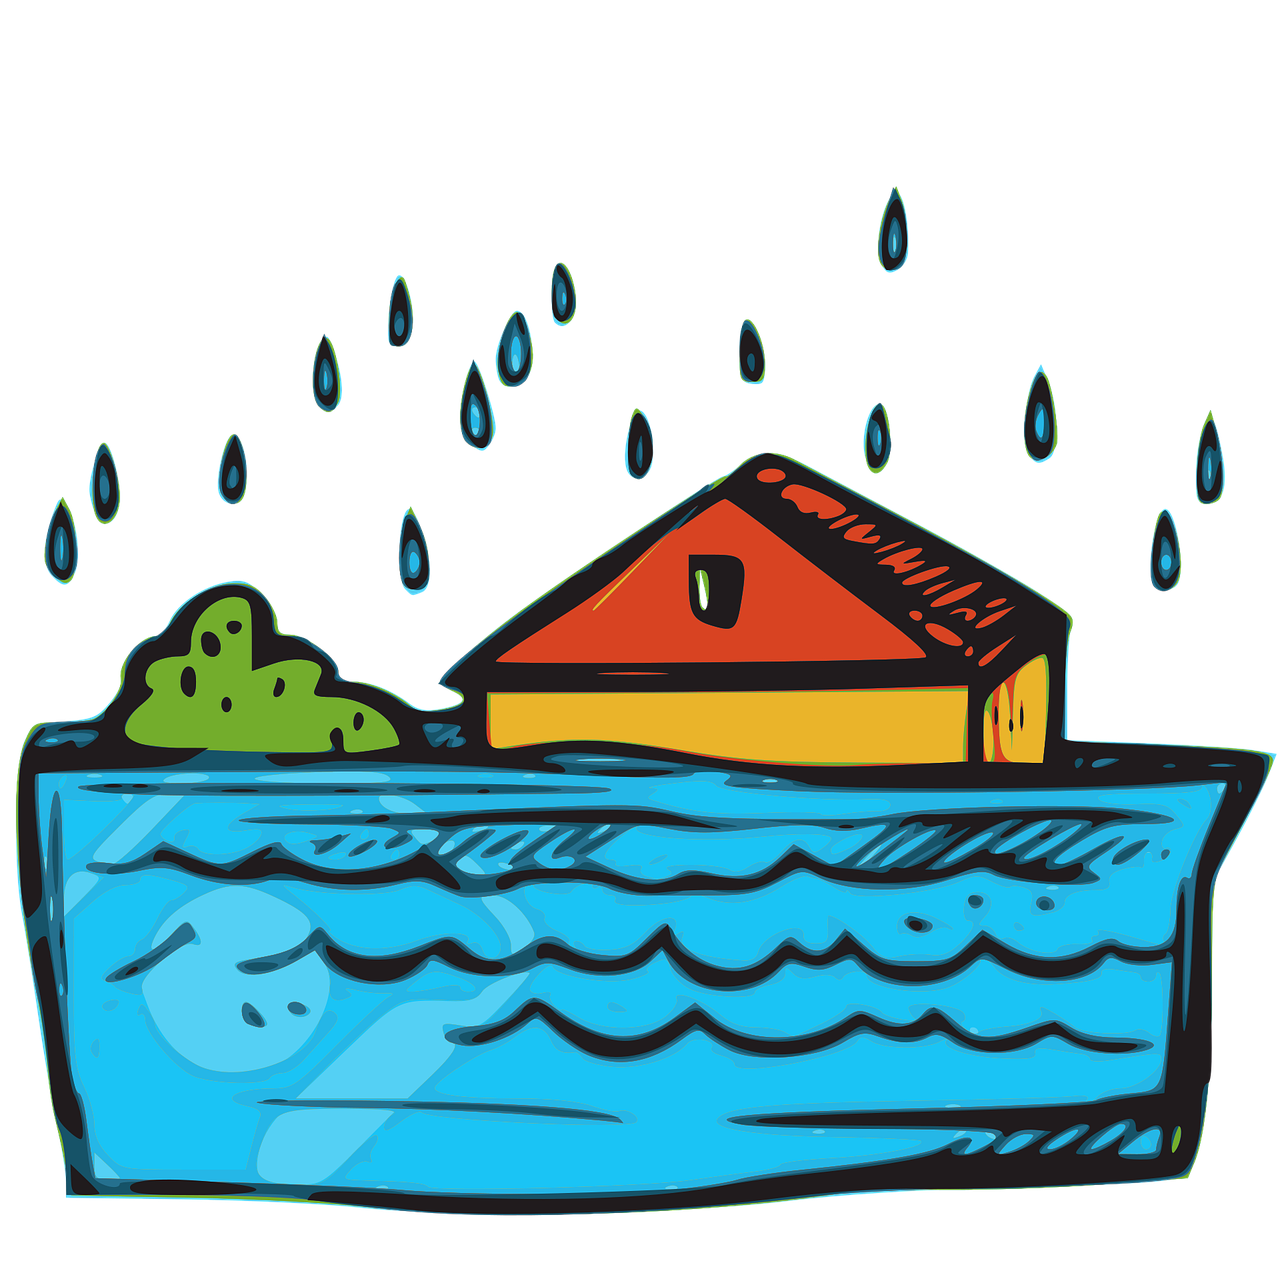 Flooded house graphic